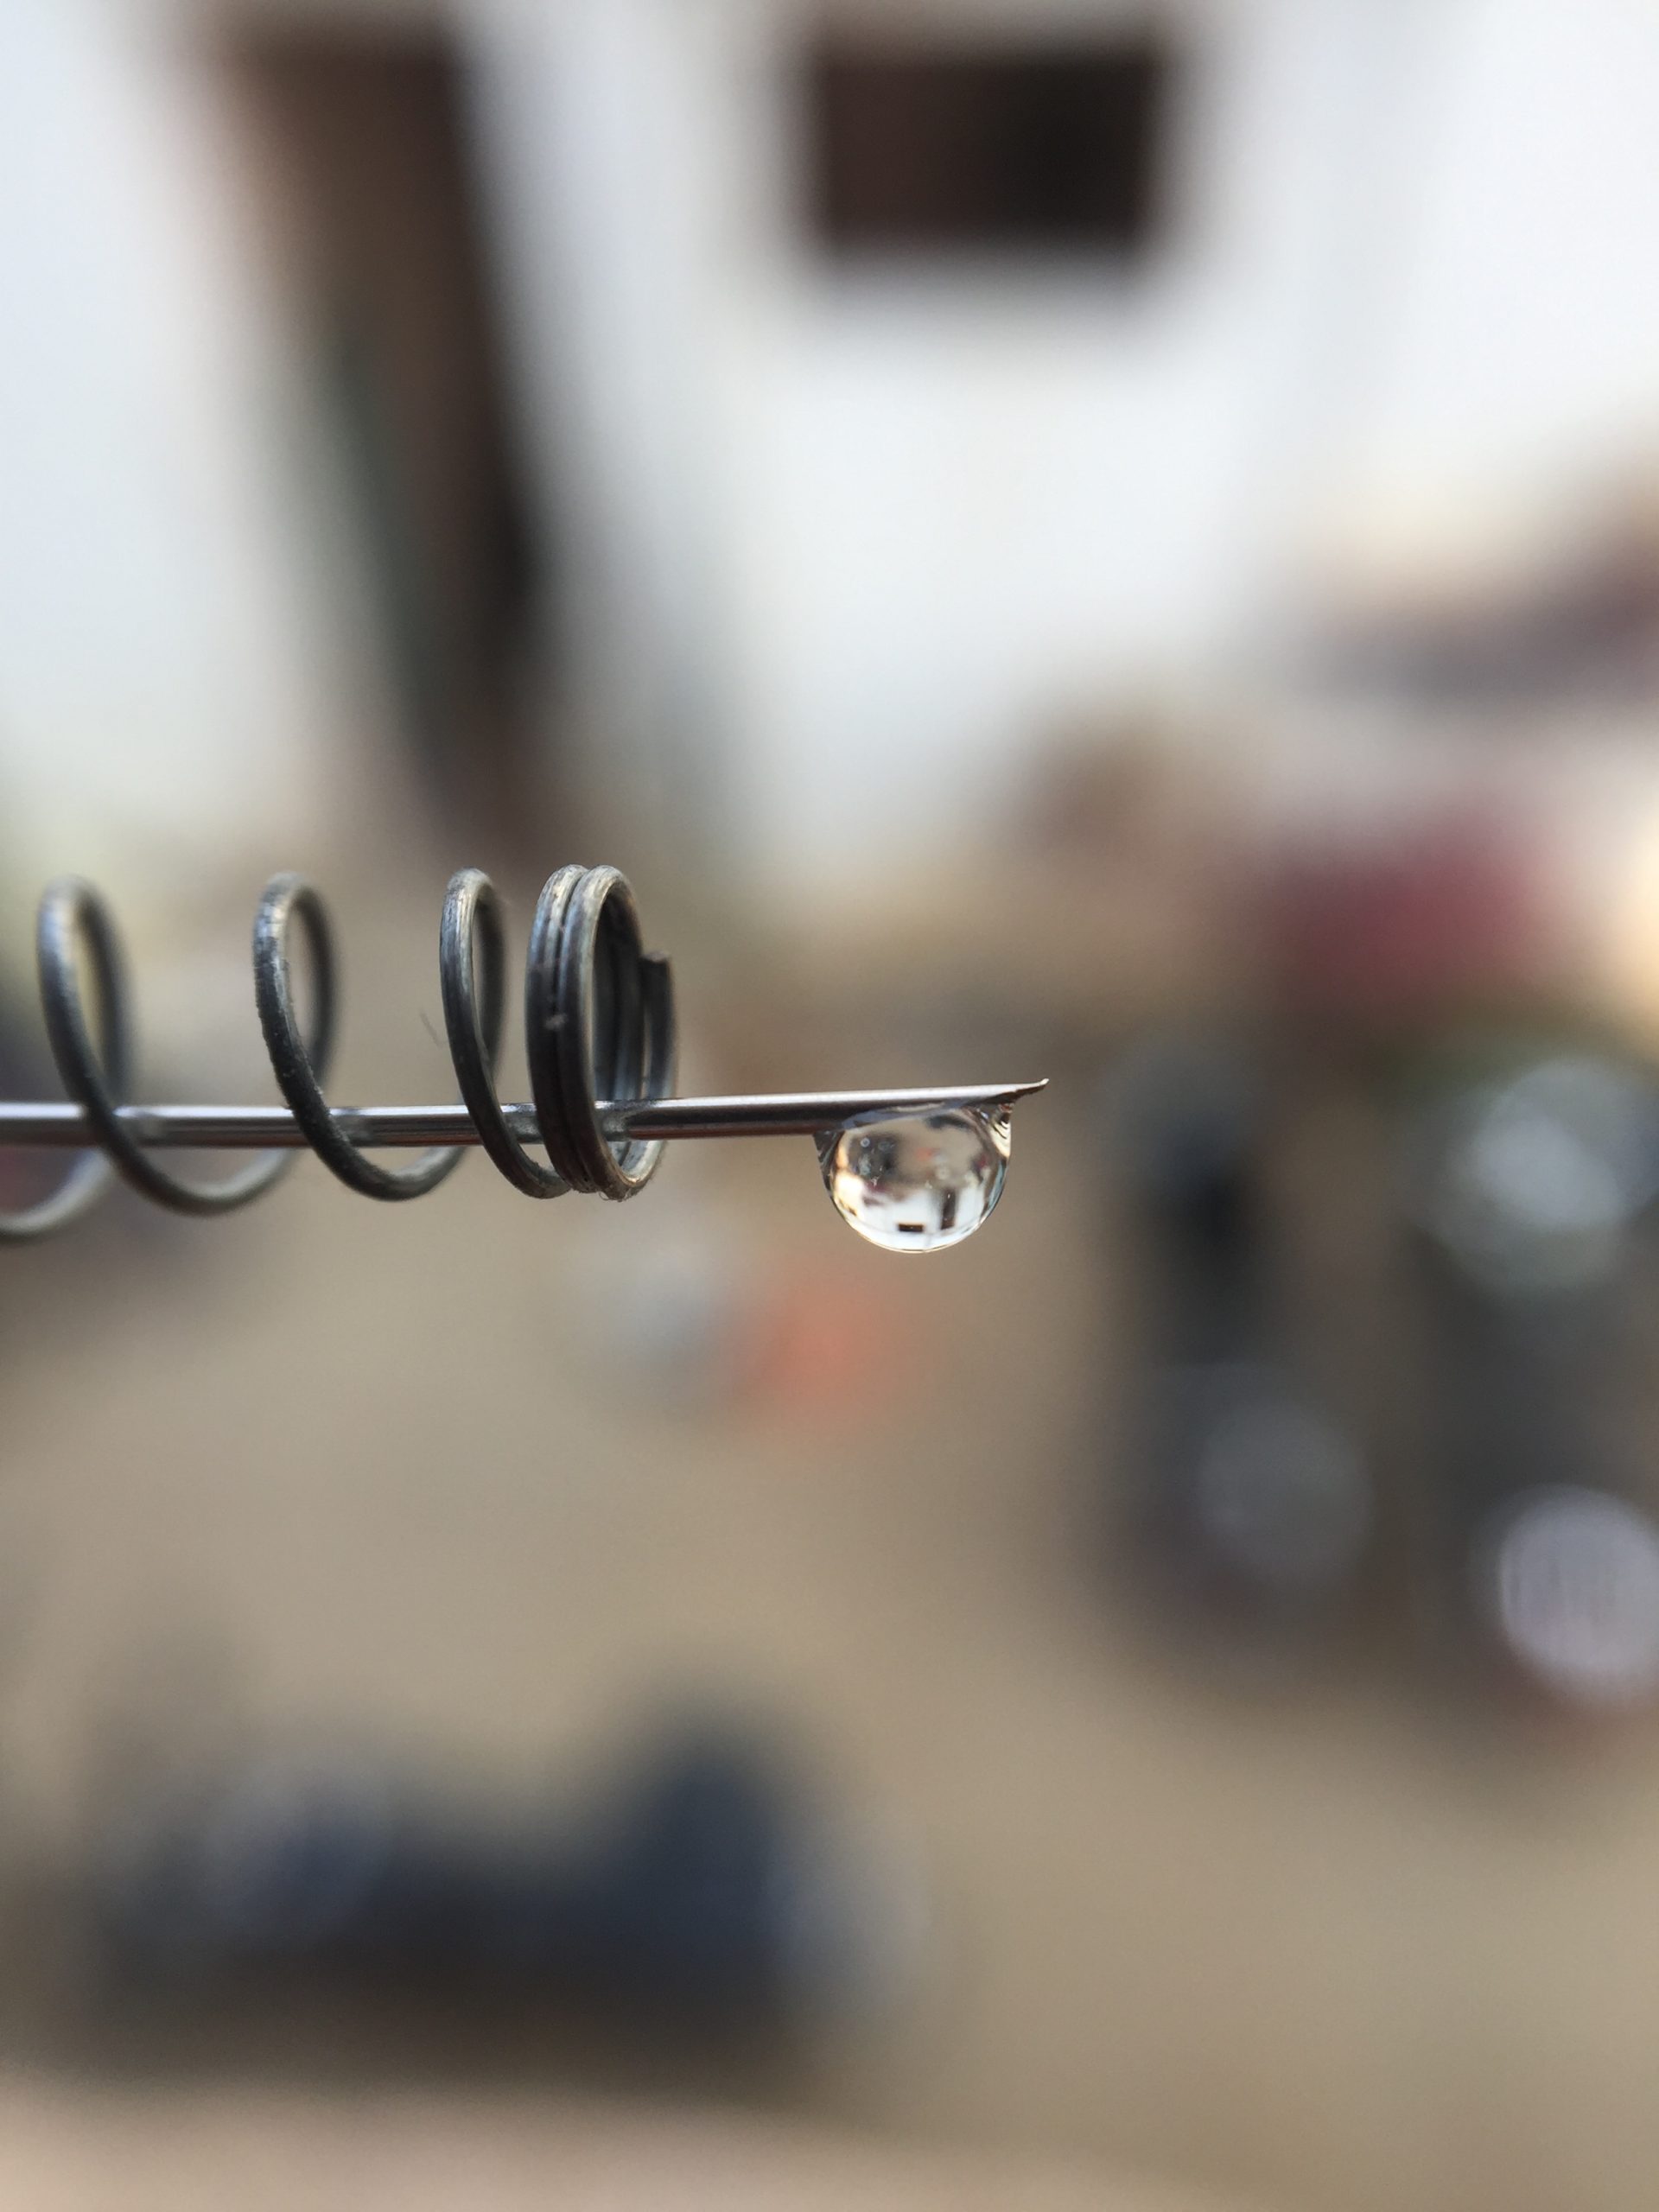 A water drop on a needle